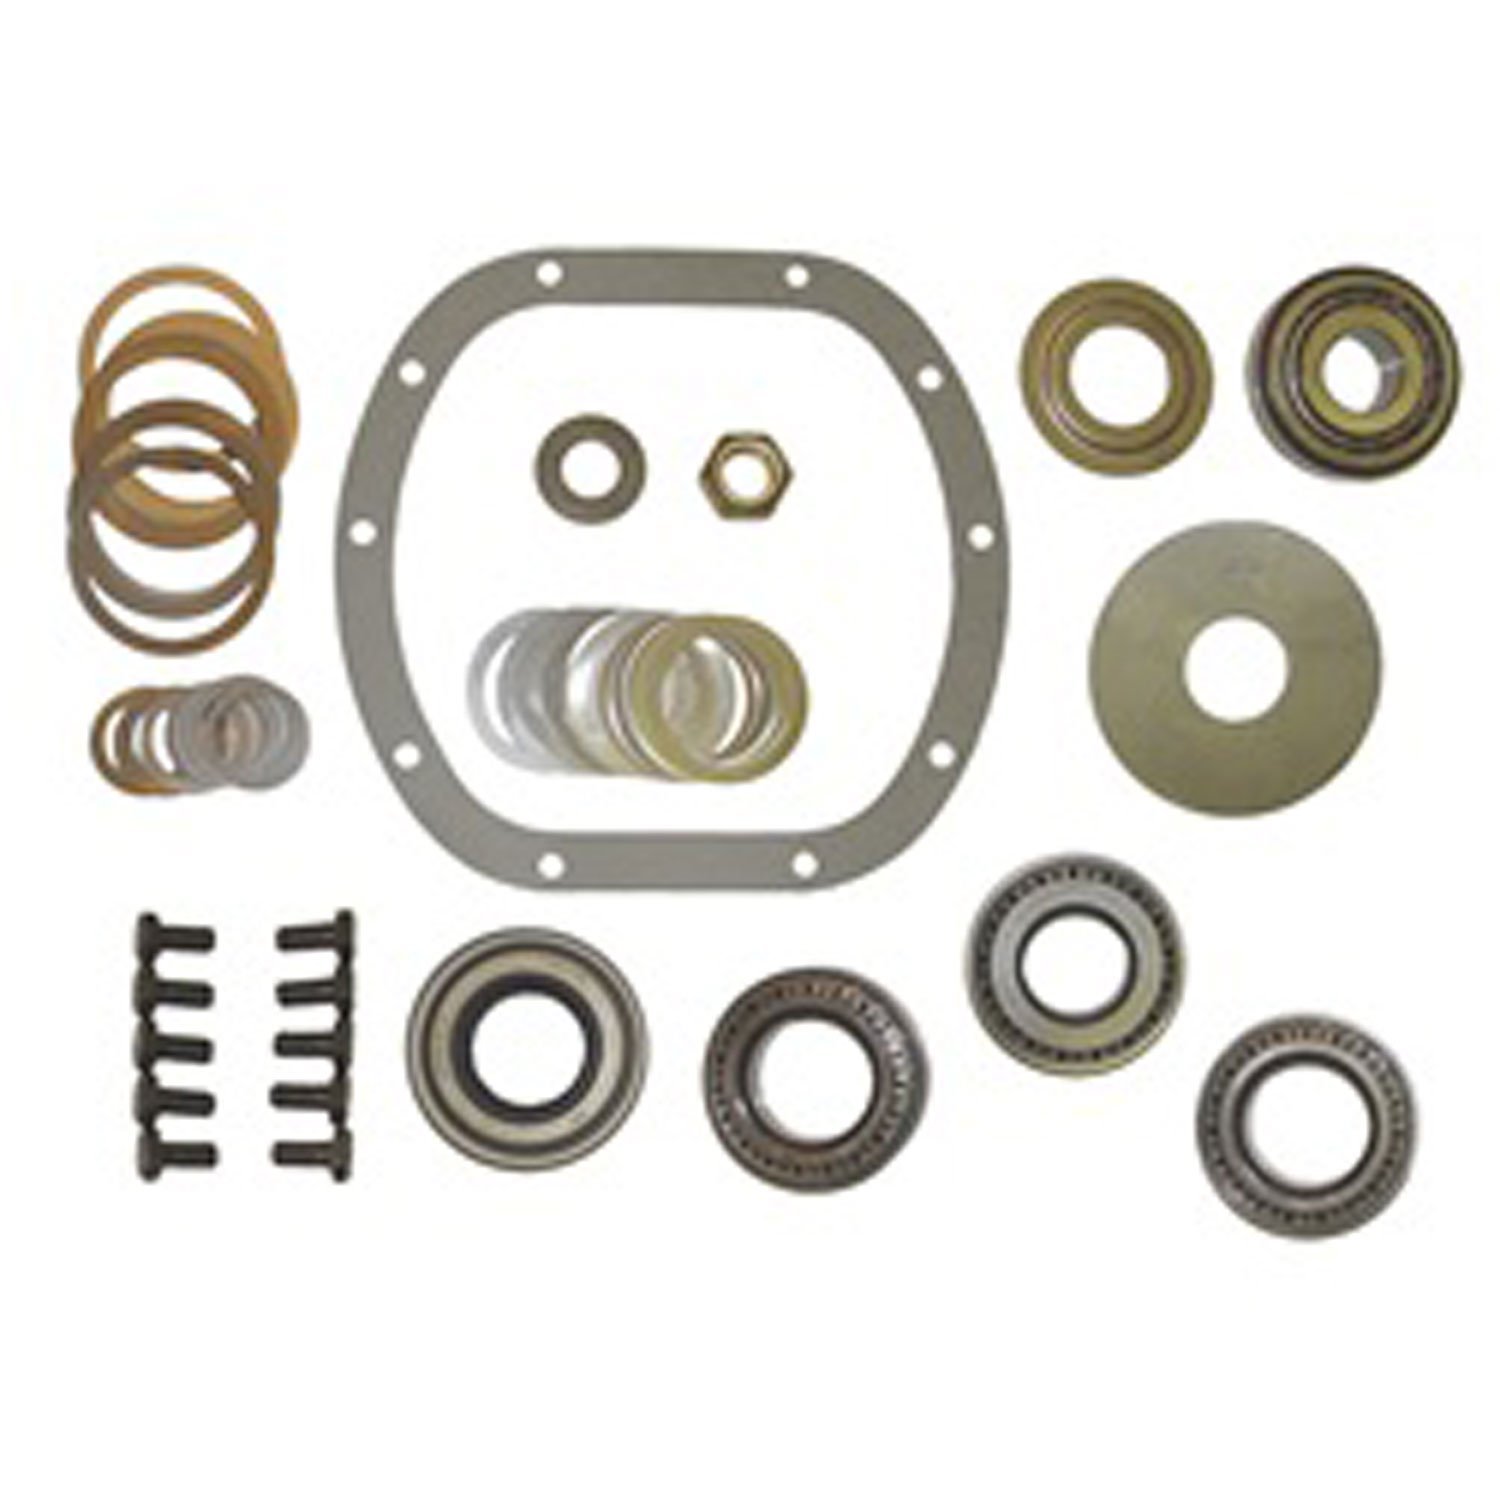 Master Rebuild Kit for 1972-1986 Jeeps with Dana 30 Axle